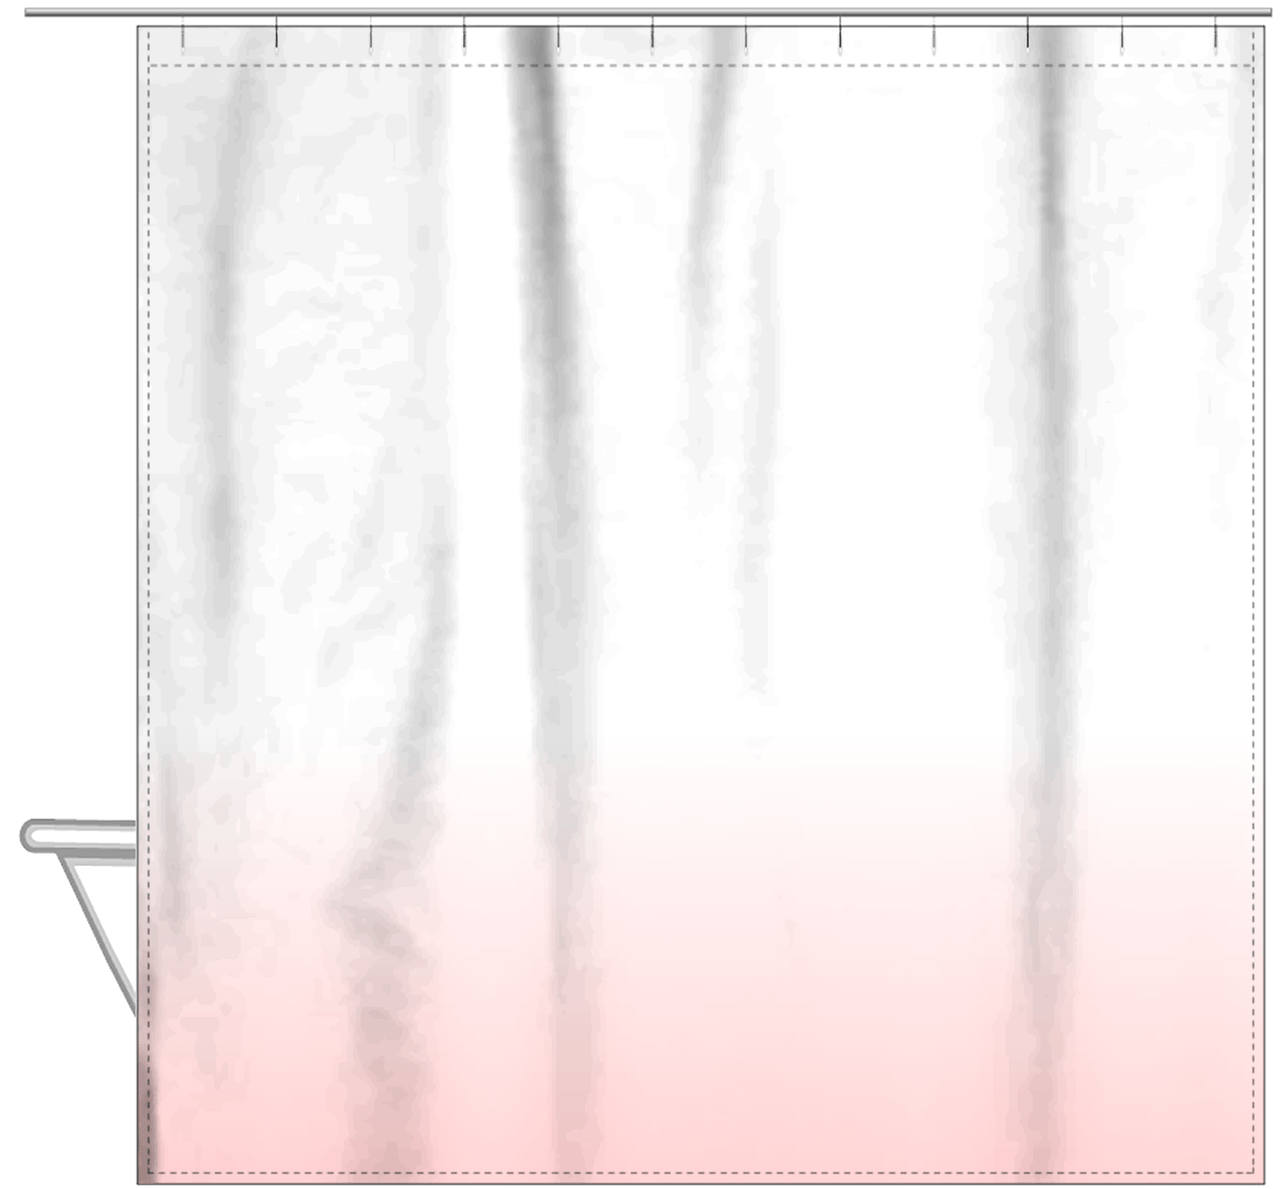 Personalized Ombre Shower Curtain - Pink and White - No Default Text - Ombre III - Hanging View